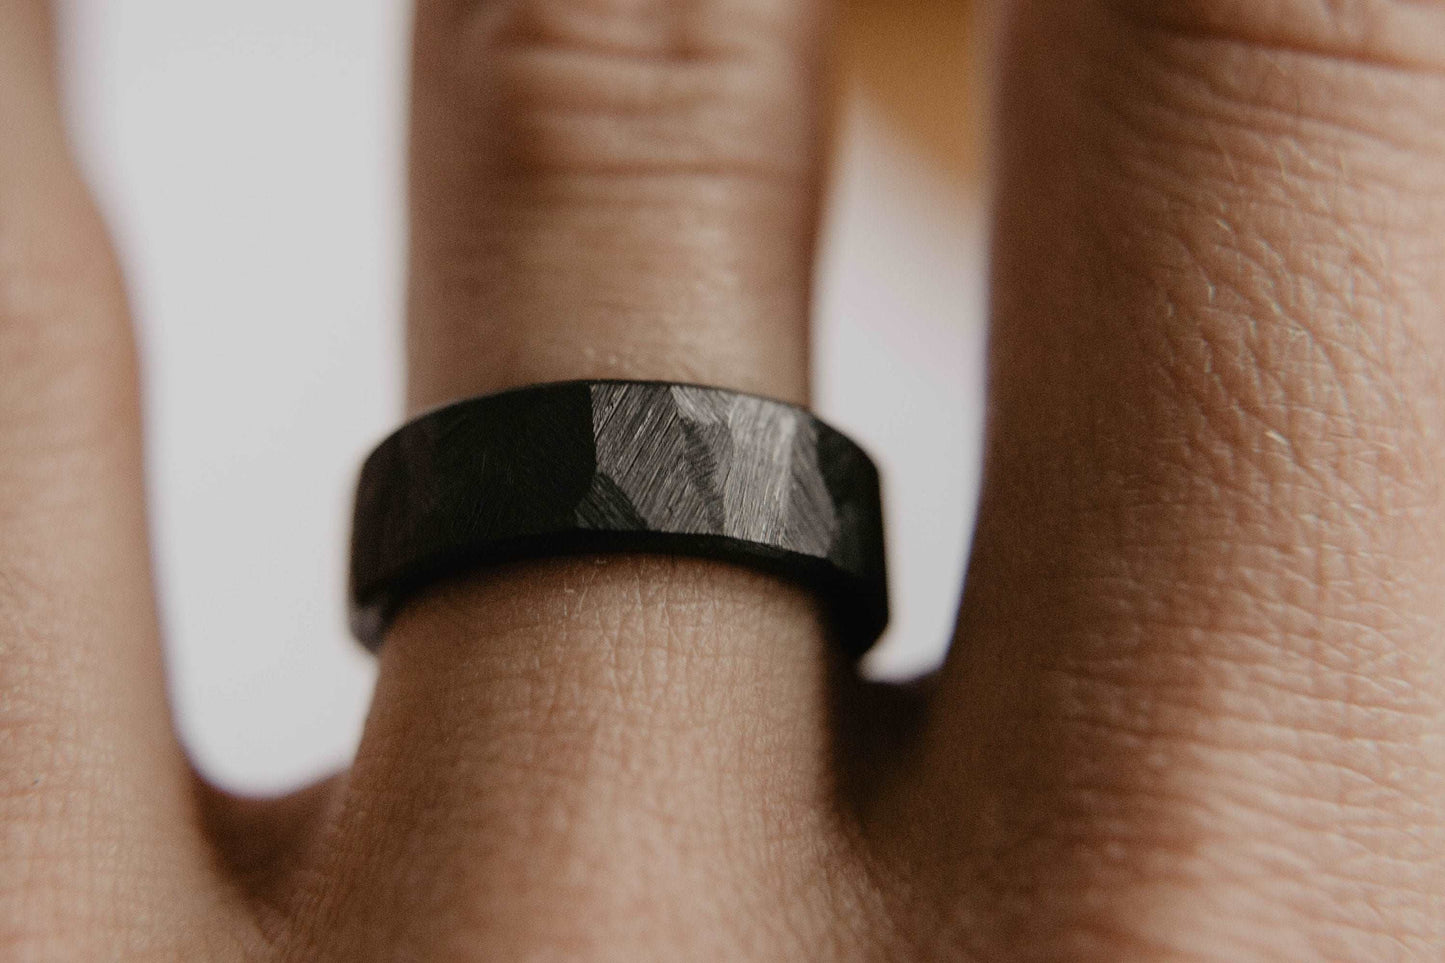 Mens black wedding band. This photo shows a roughly faceted black zirconium ring. (Shown on finger)